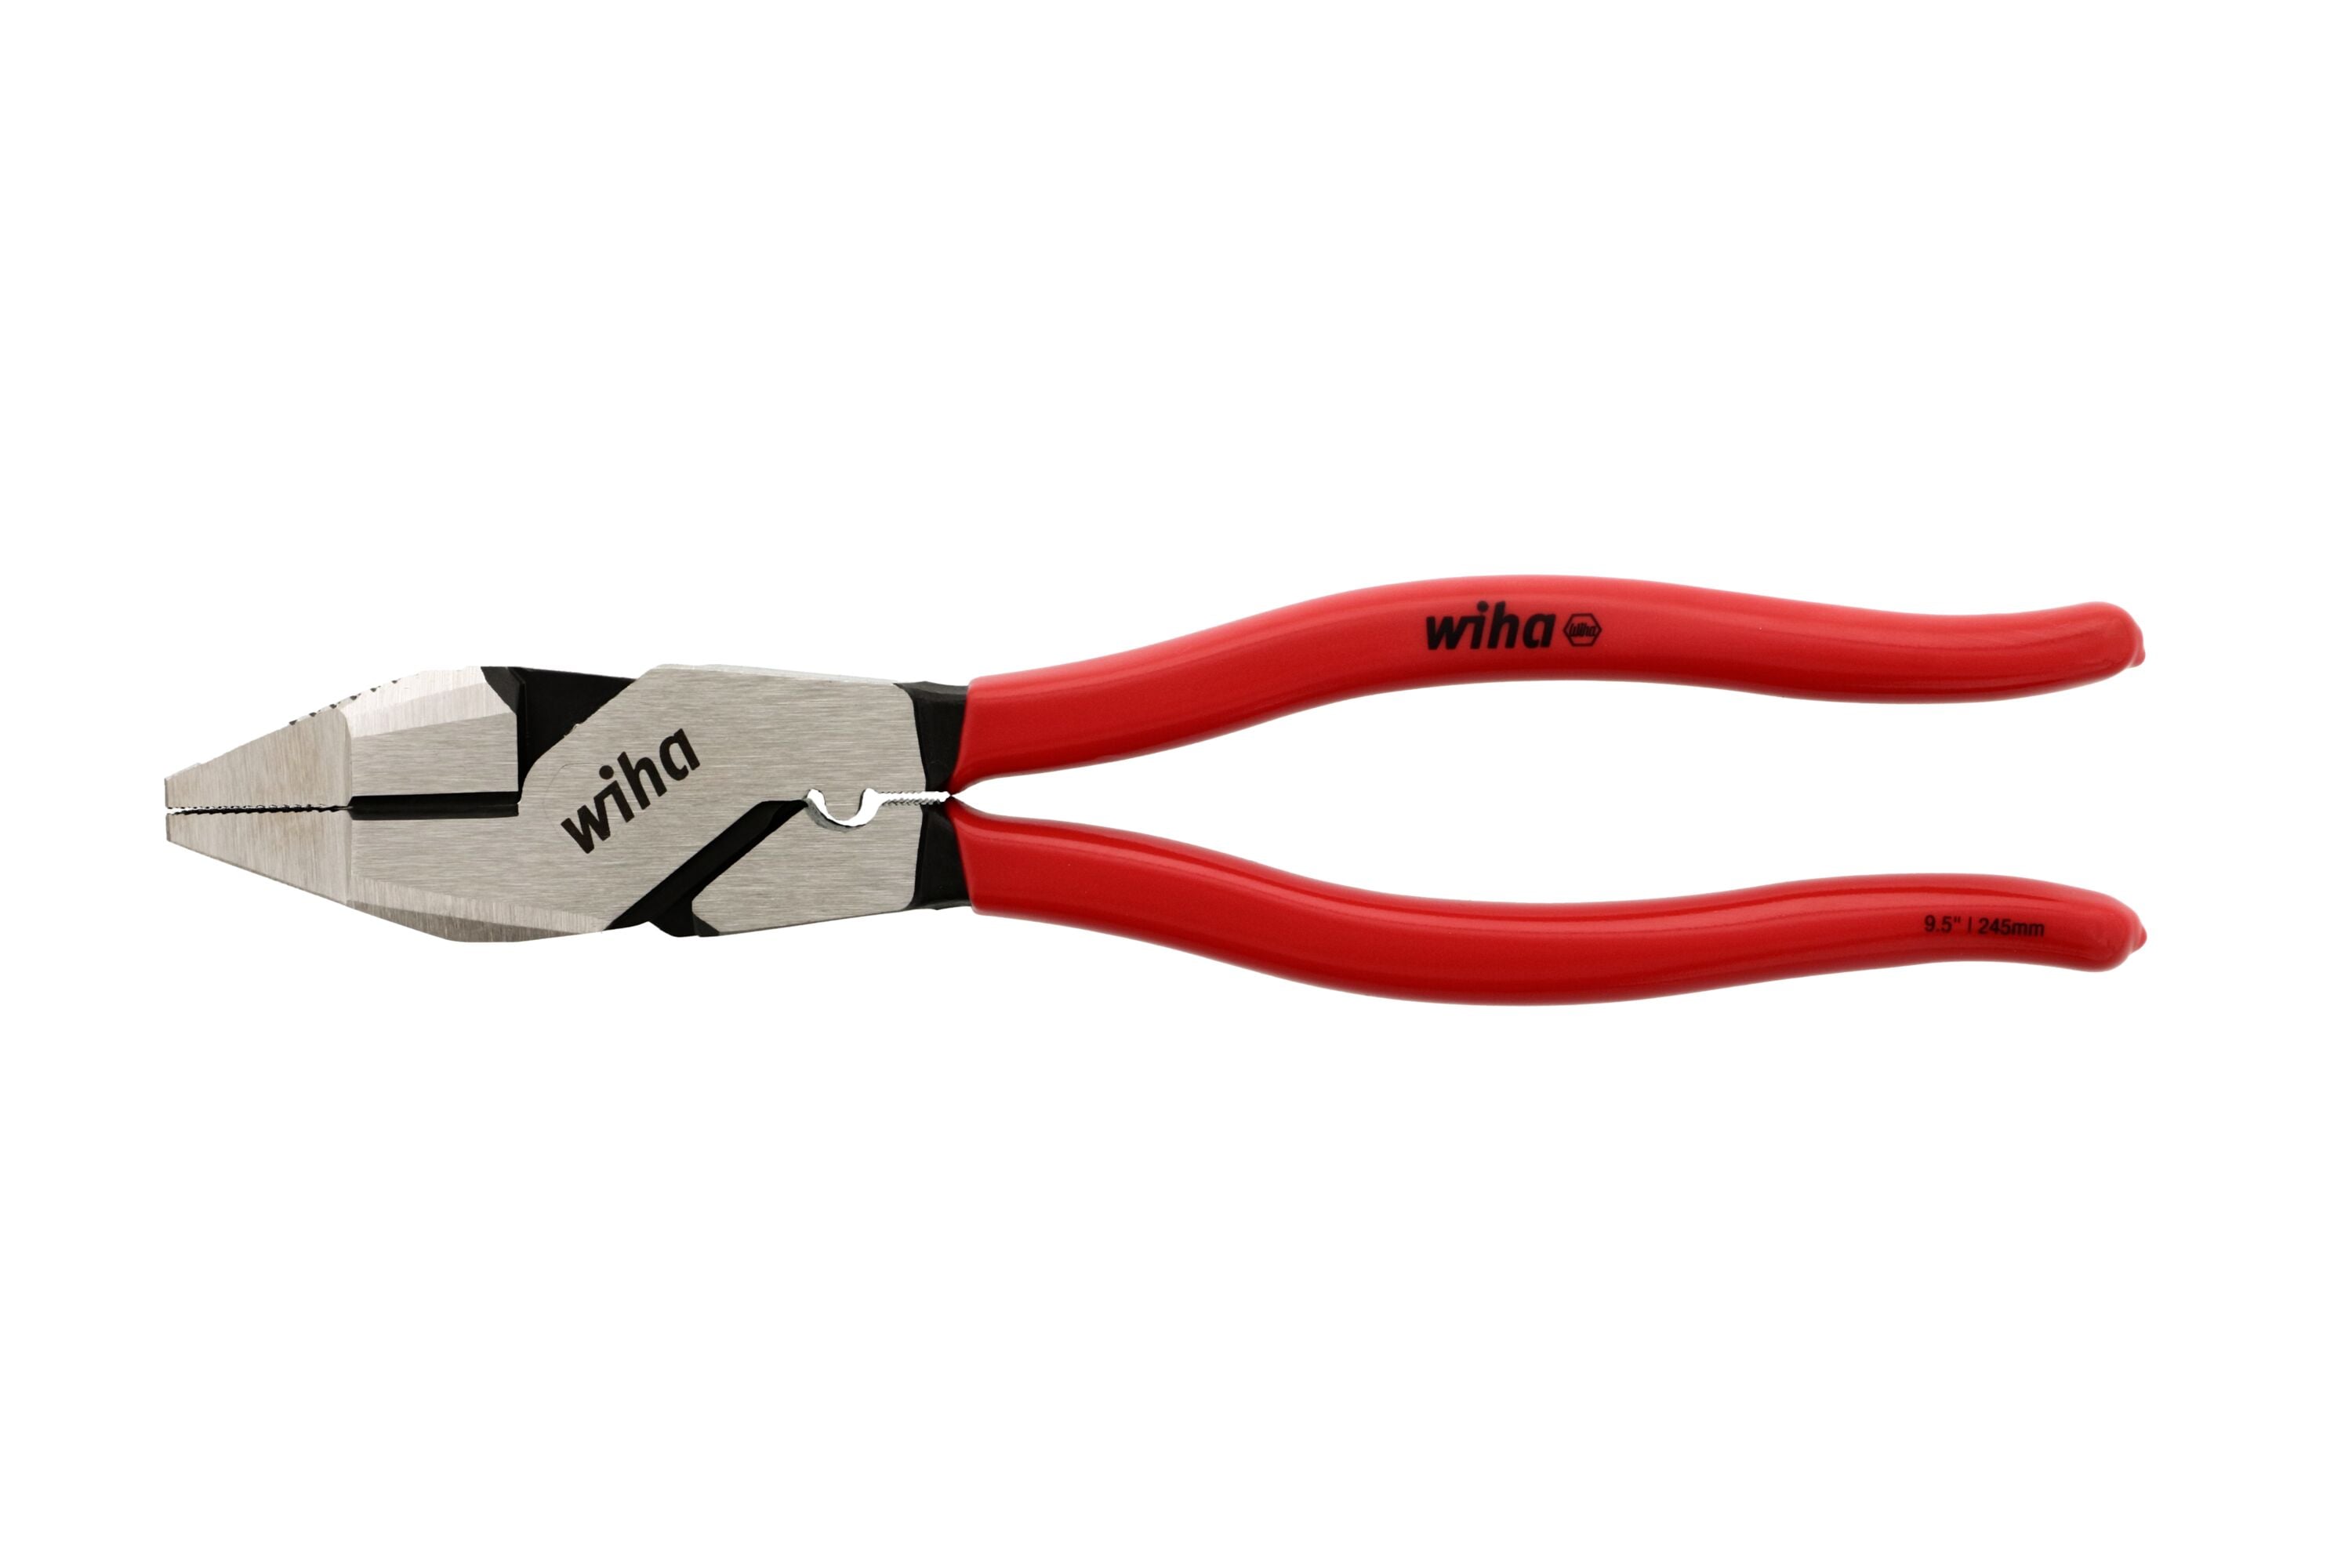 Wiha Classic Grip 9.5-in Electrical Lineman Cutting Pliers in the